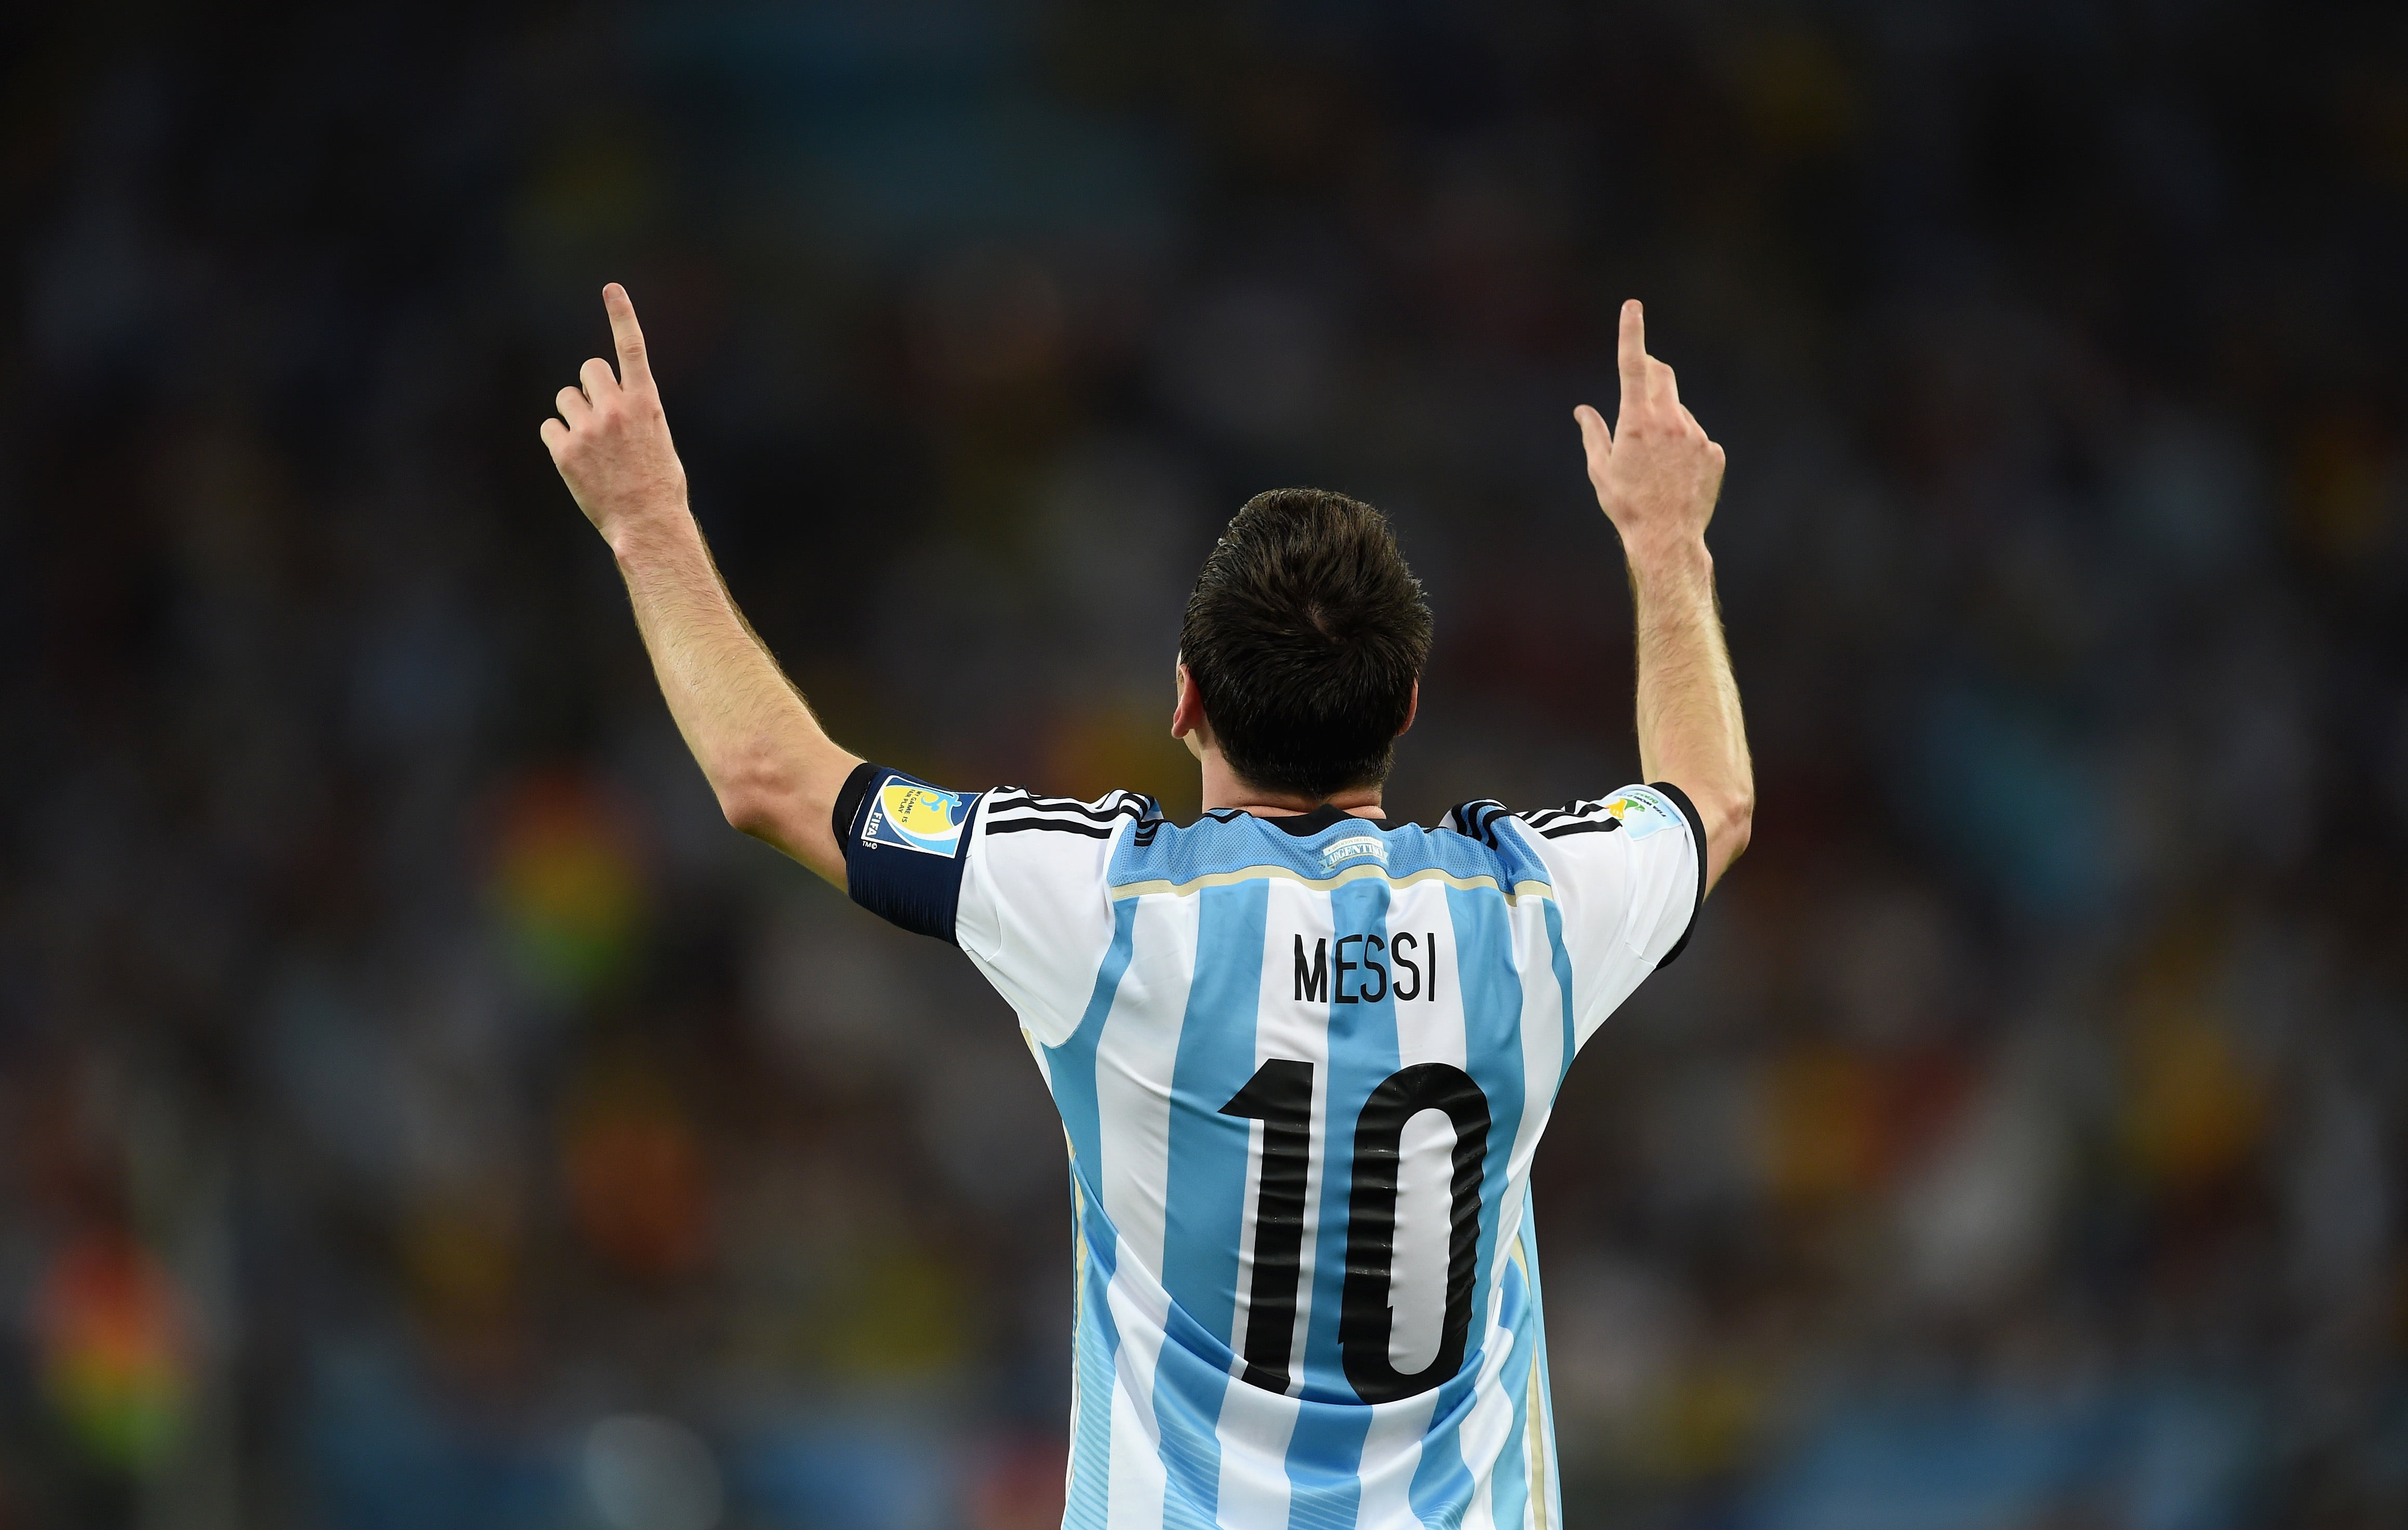 Photo of Lionel Messi wearing teal and gray jersey HD wallpaper | Wallpaper  Flare